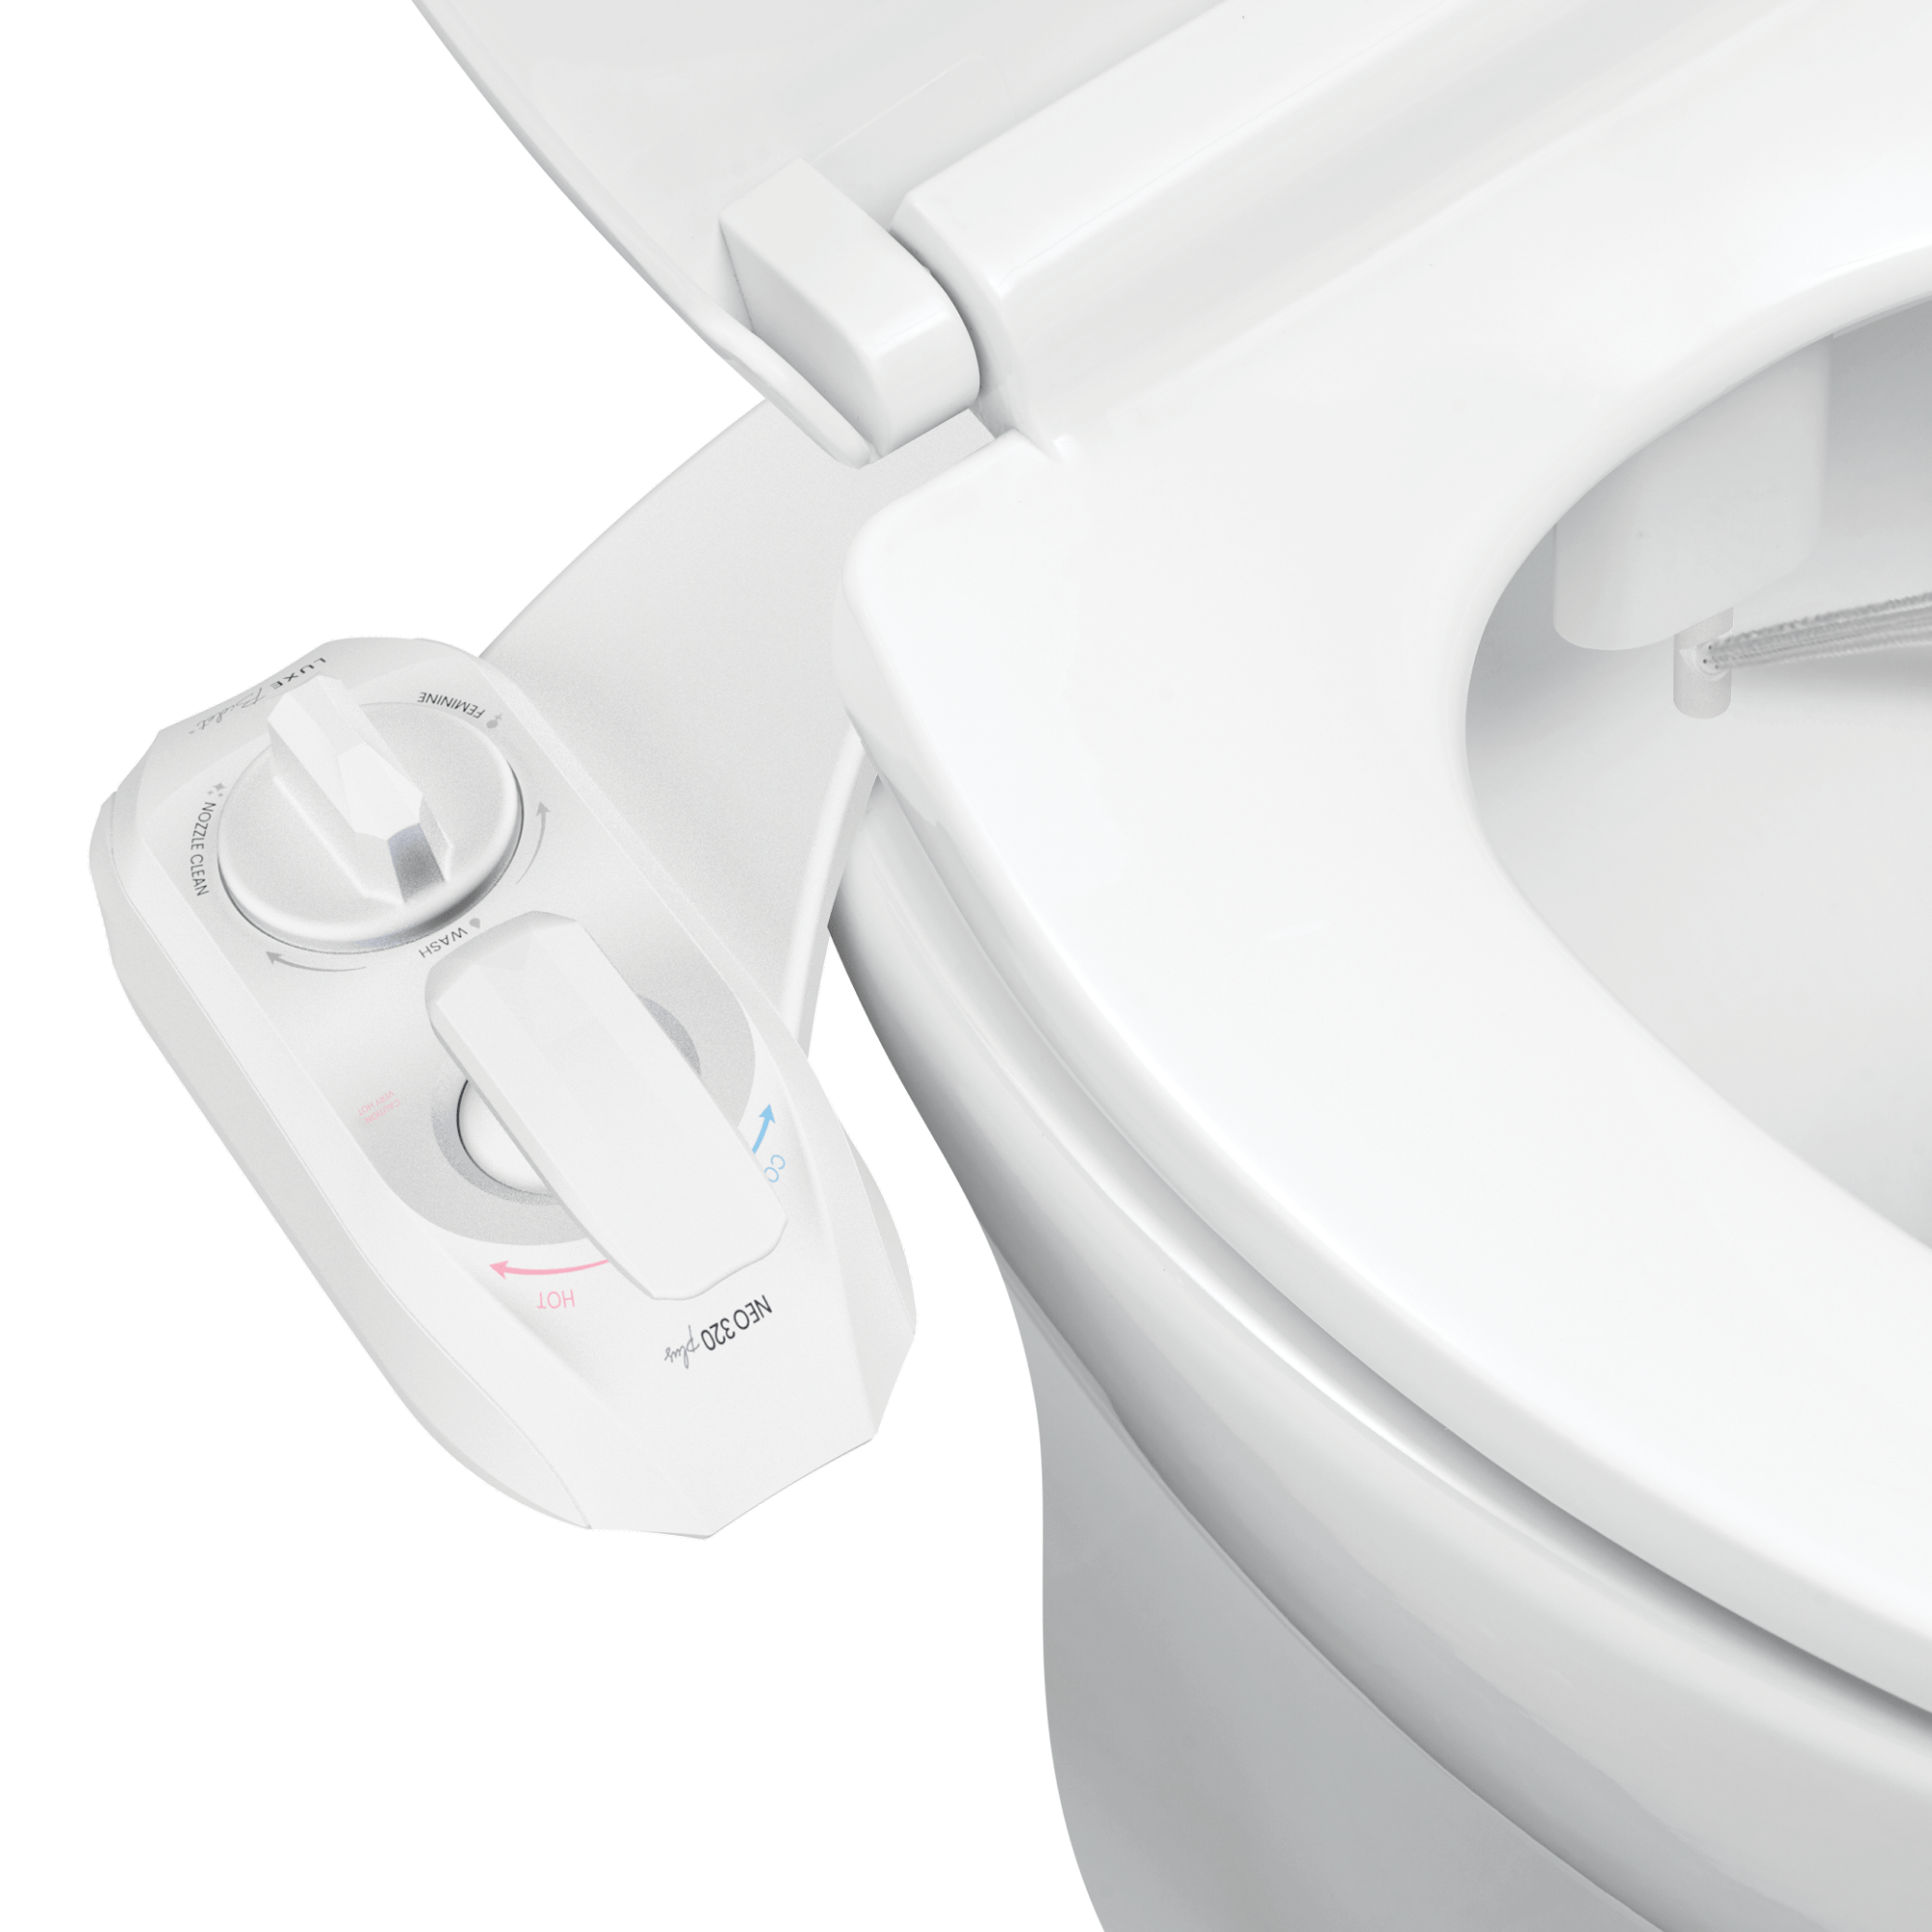 NEO 320 Plus White installed on a toilet with water spraying from nozzles